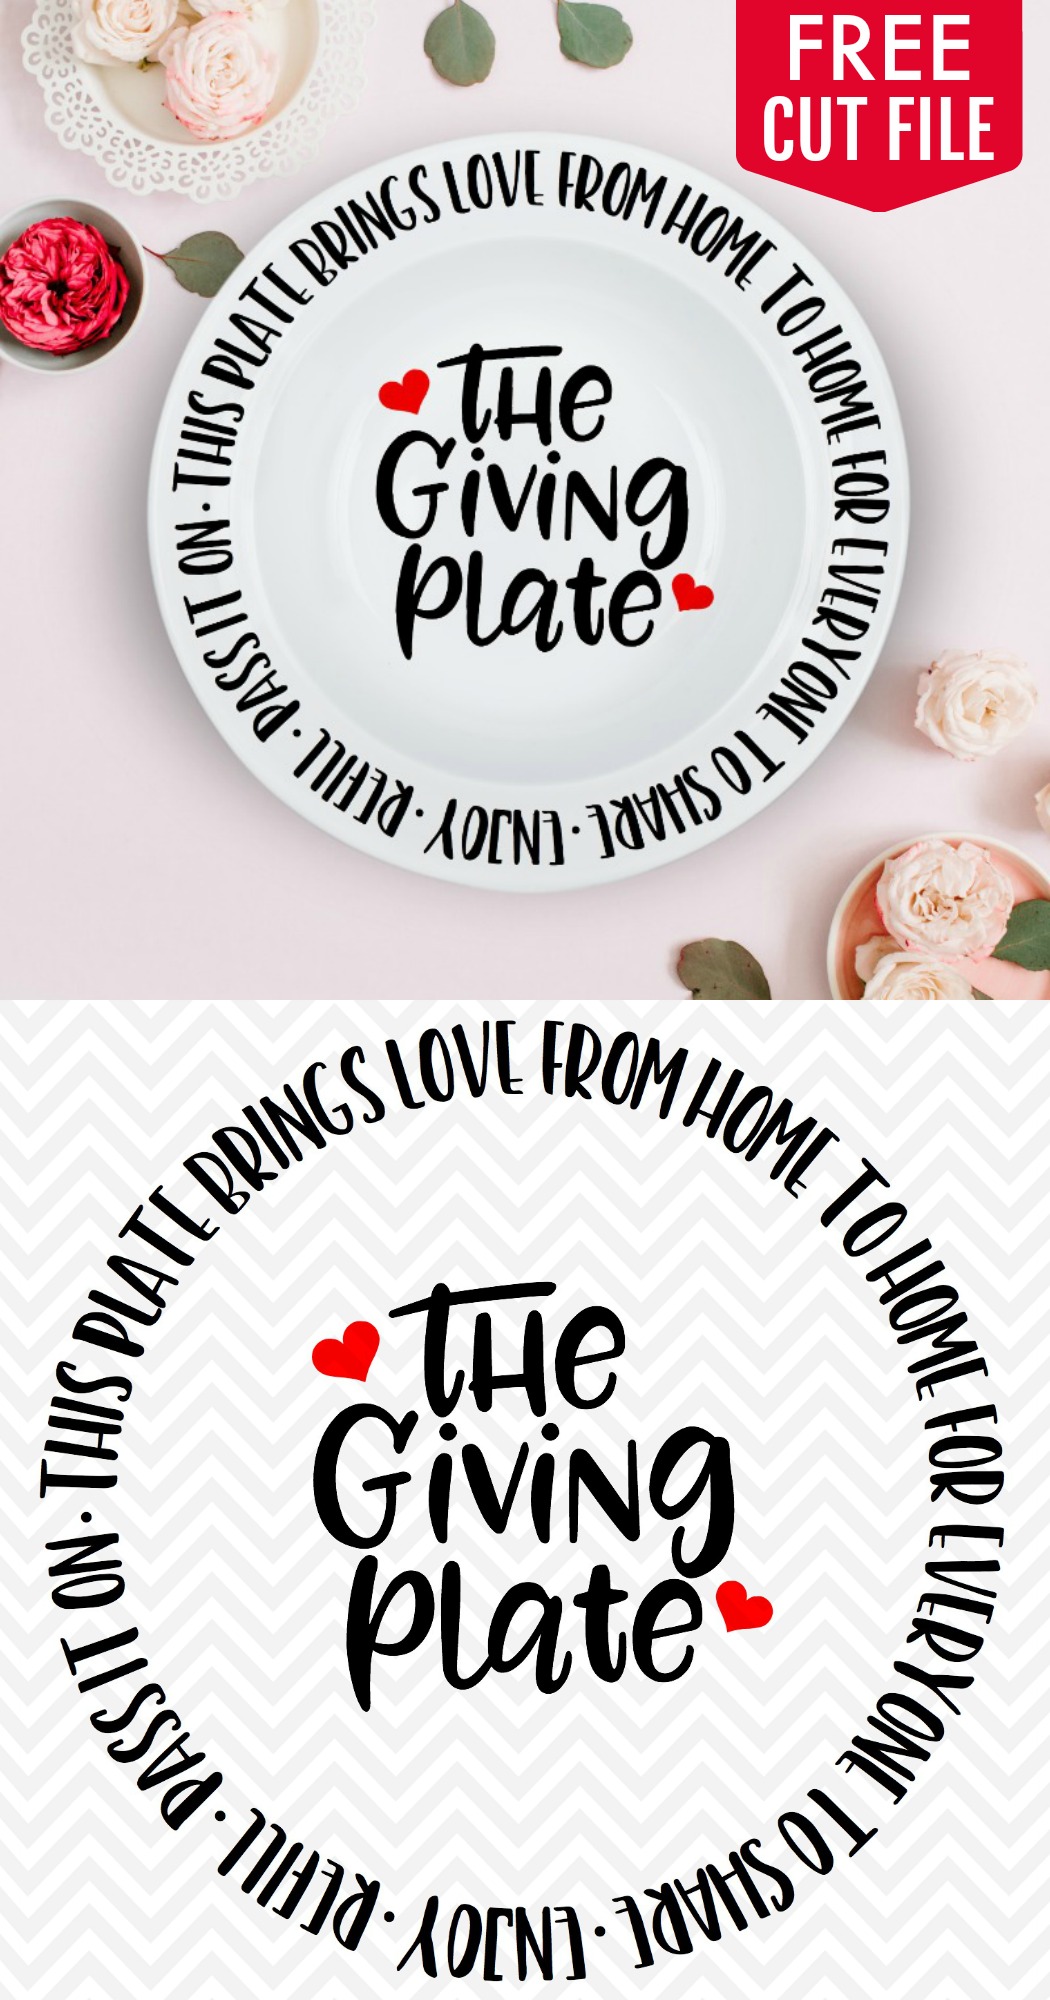 https://www.happygoluckyblog.com/wp-content/uploads/2019/02/The-Giving-Plate-Free-SVG-Cut-File-Collage.jpg